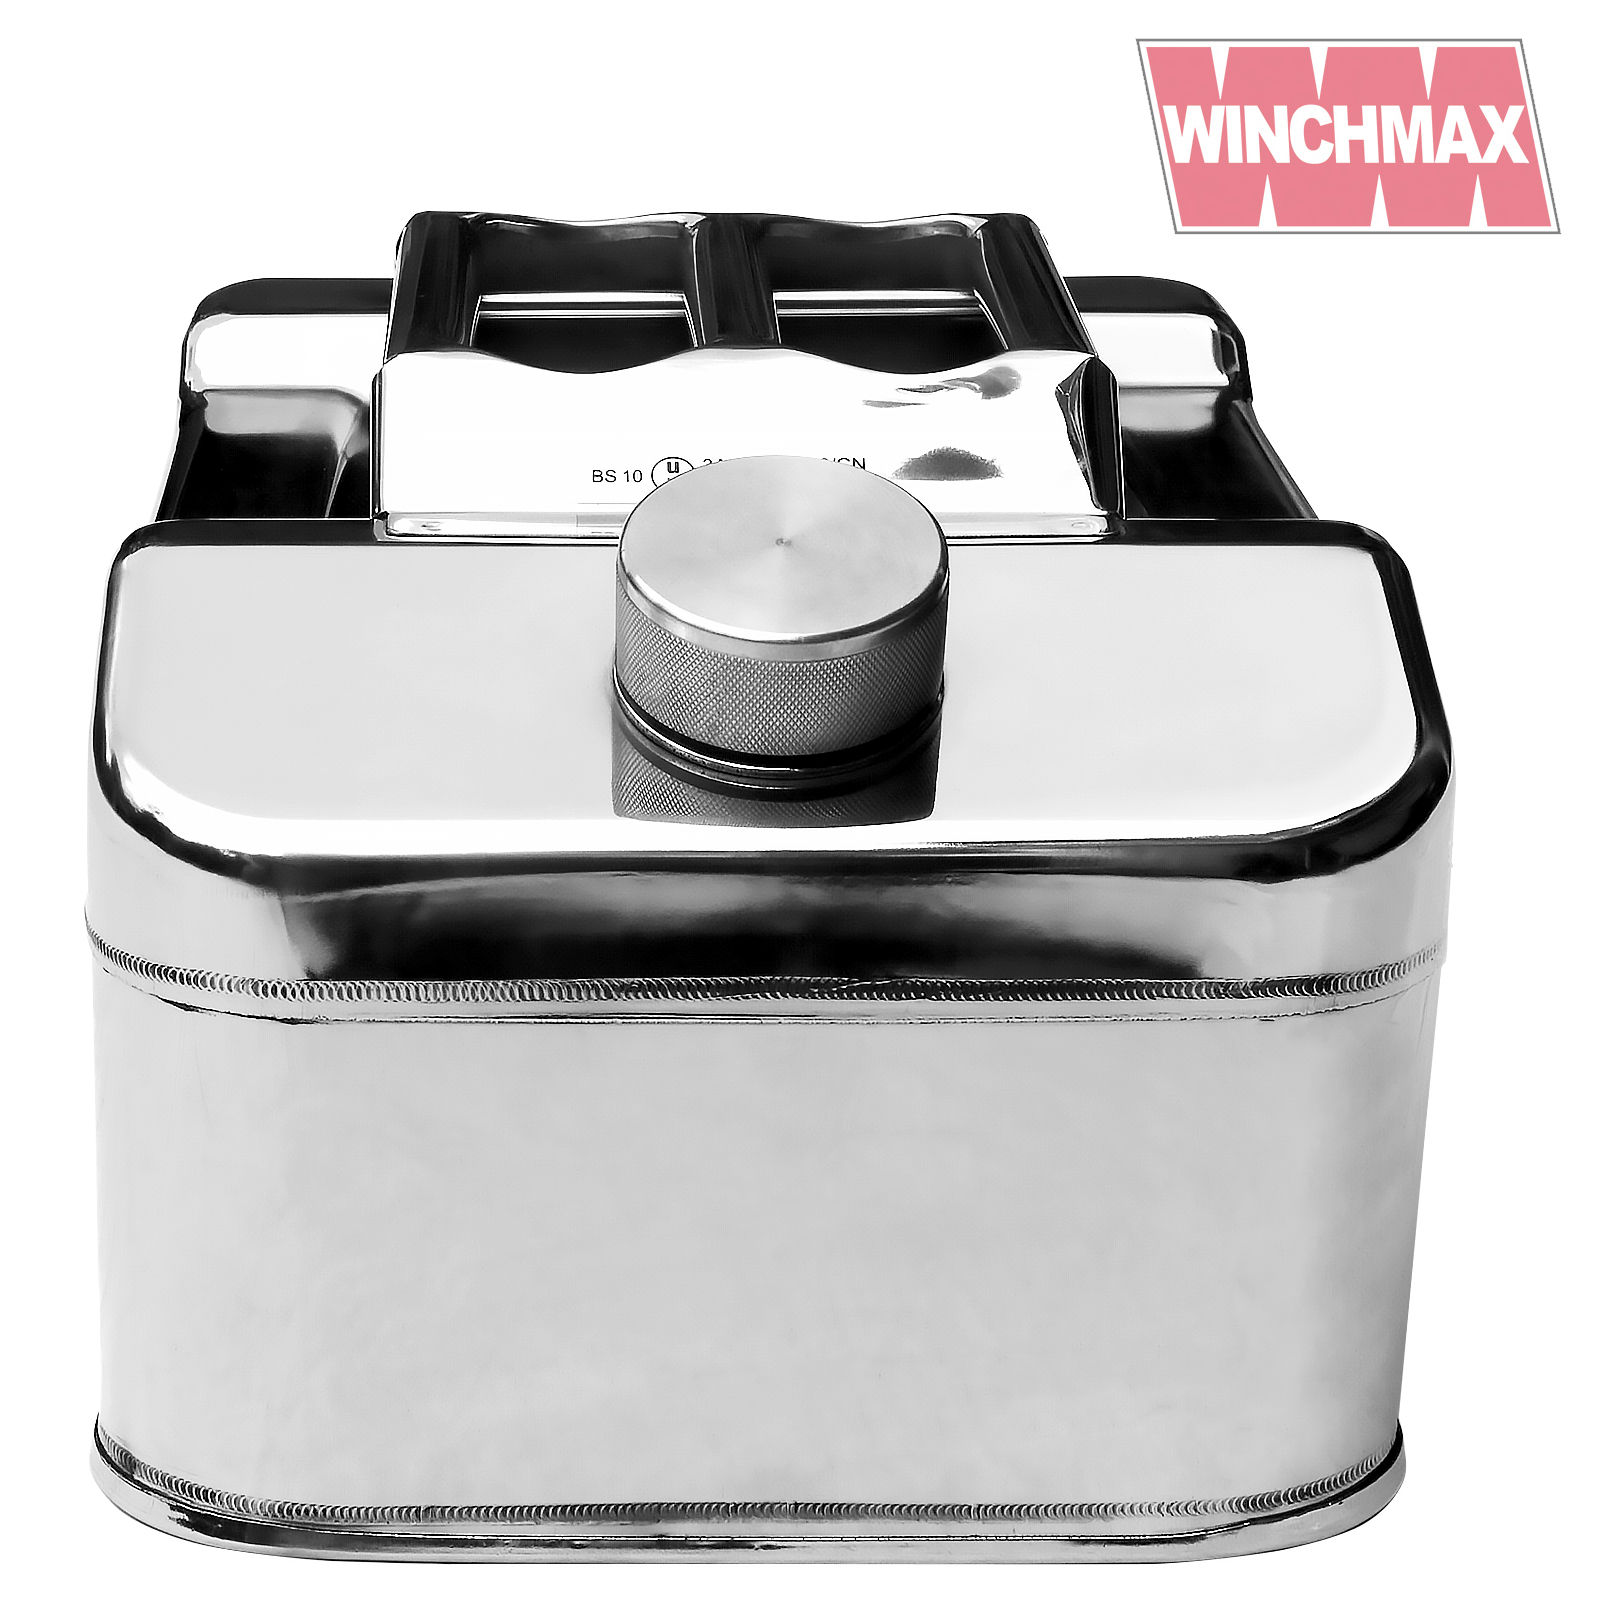 Winchmax 10l Compact Jerry can